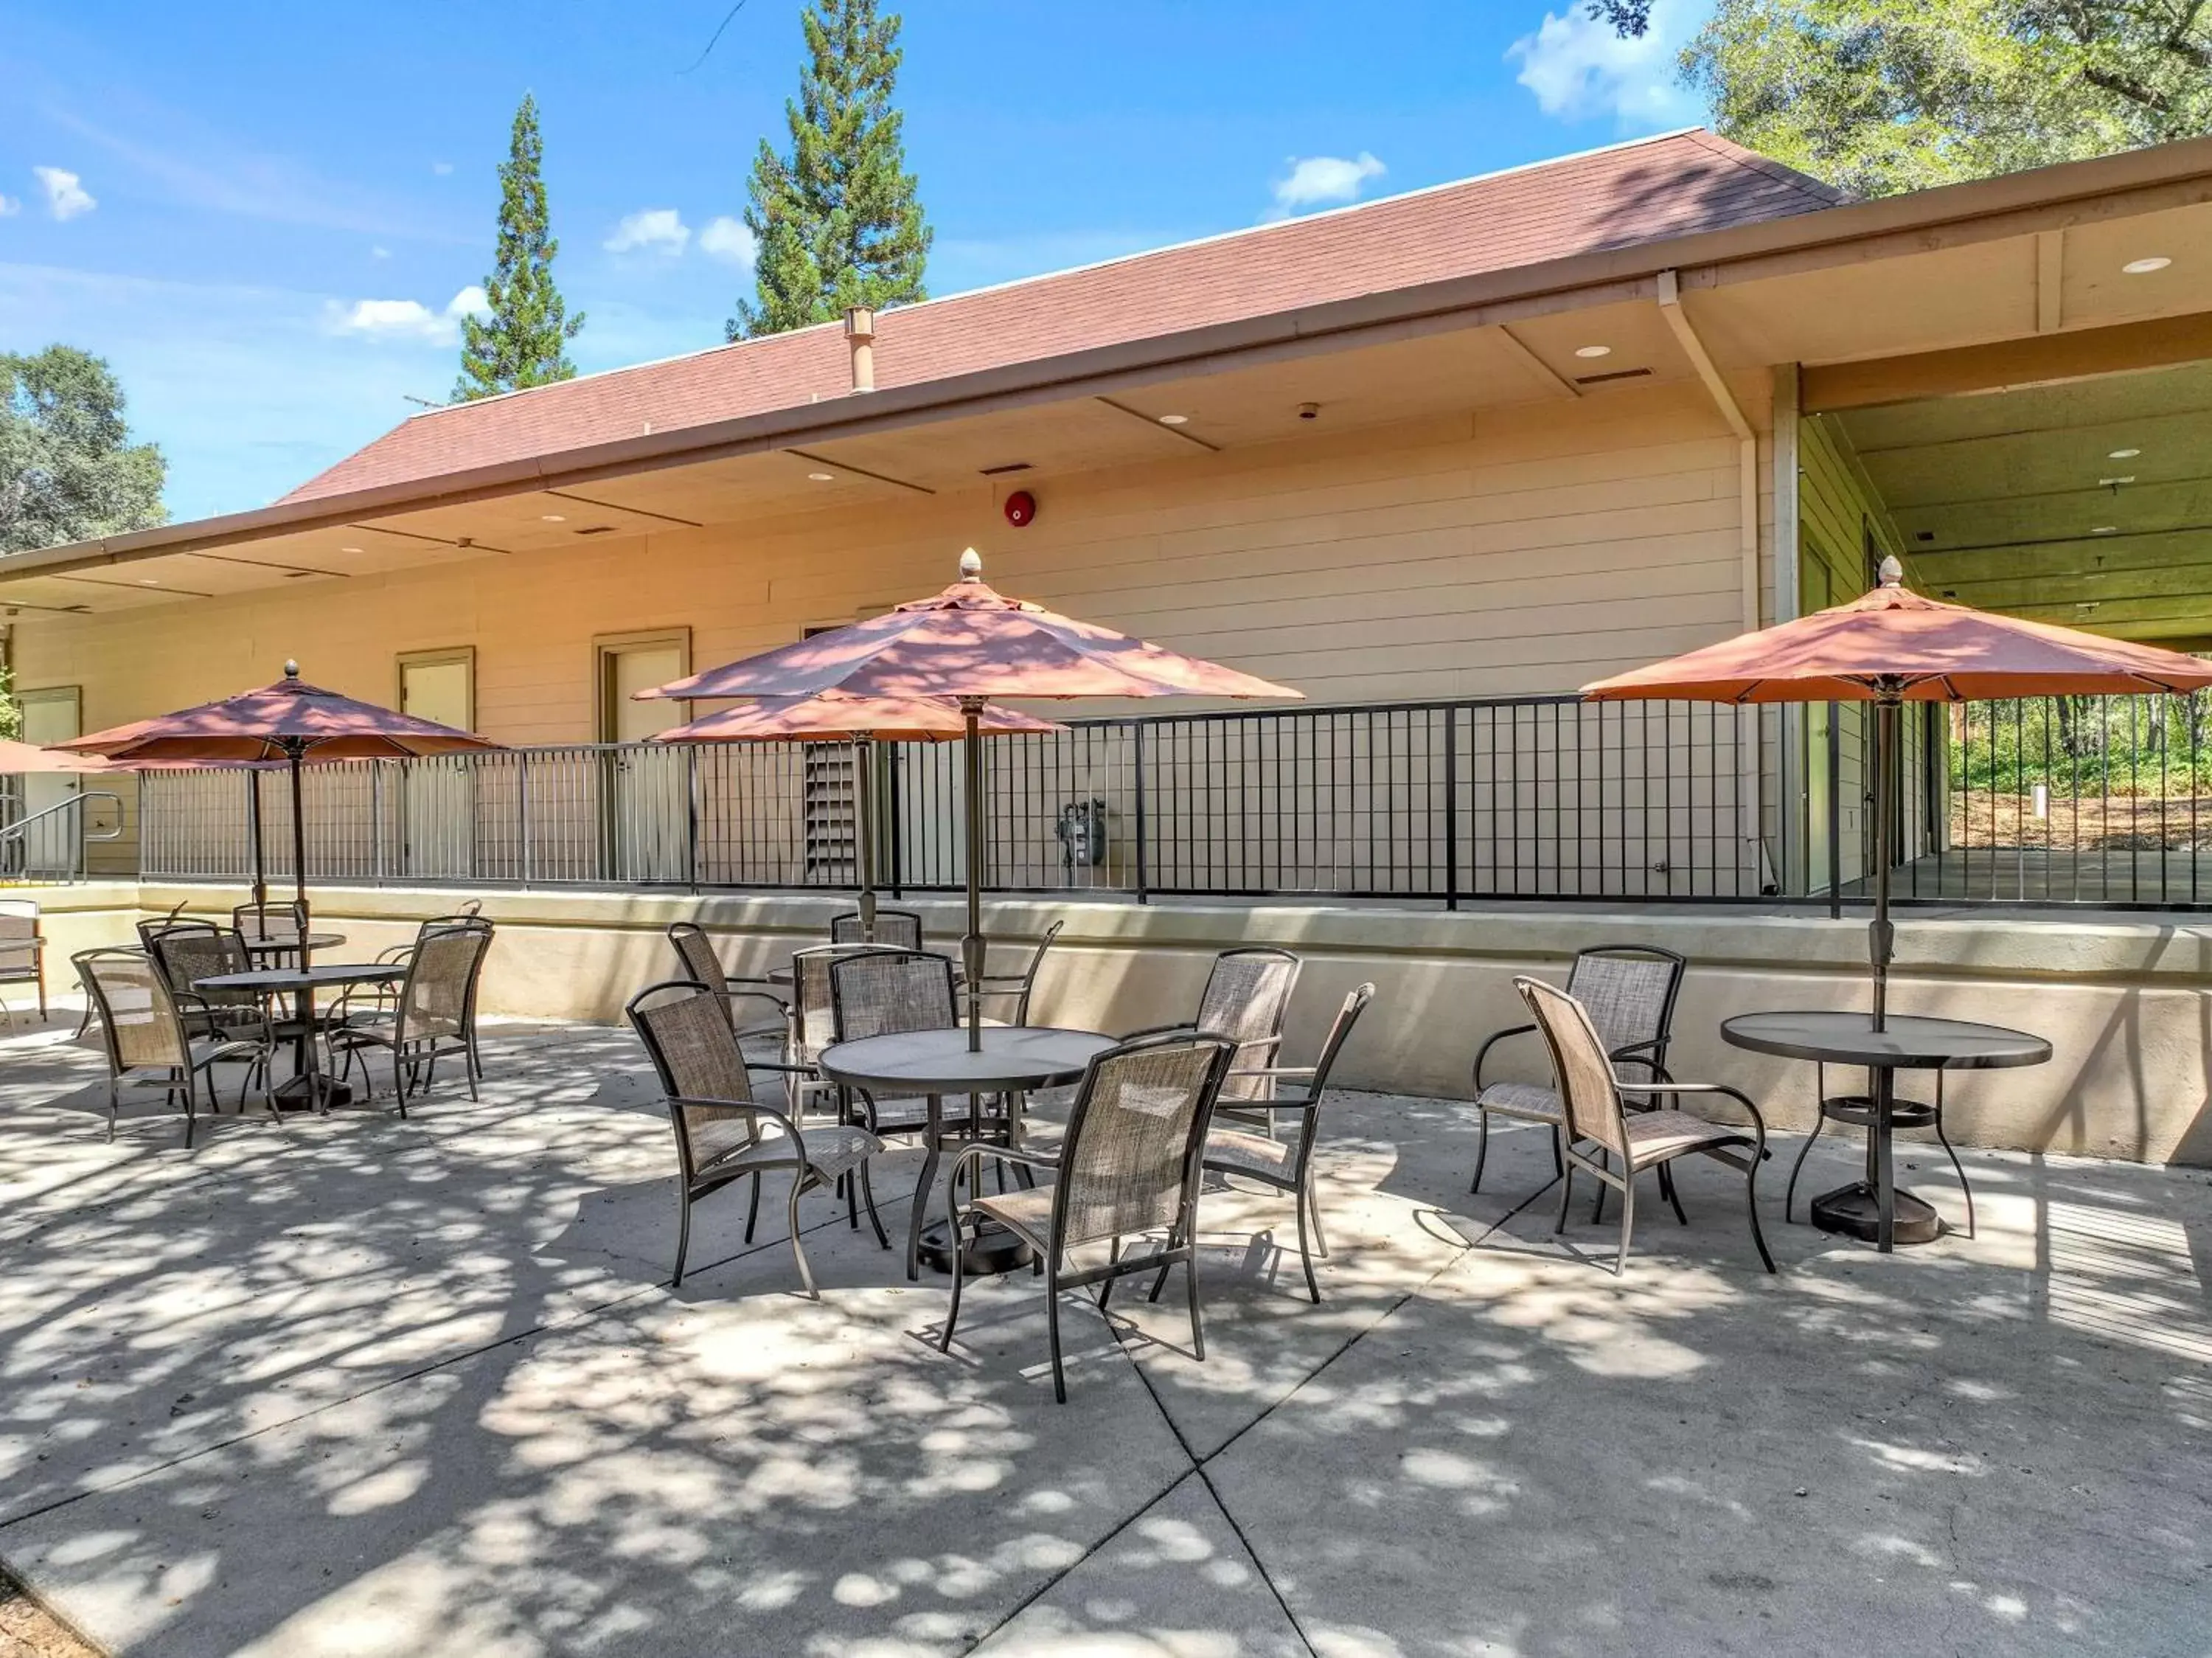 Property building in Best Western Plus Sonora Oaks Hotel and Conference Center